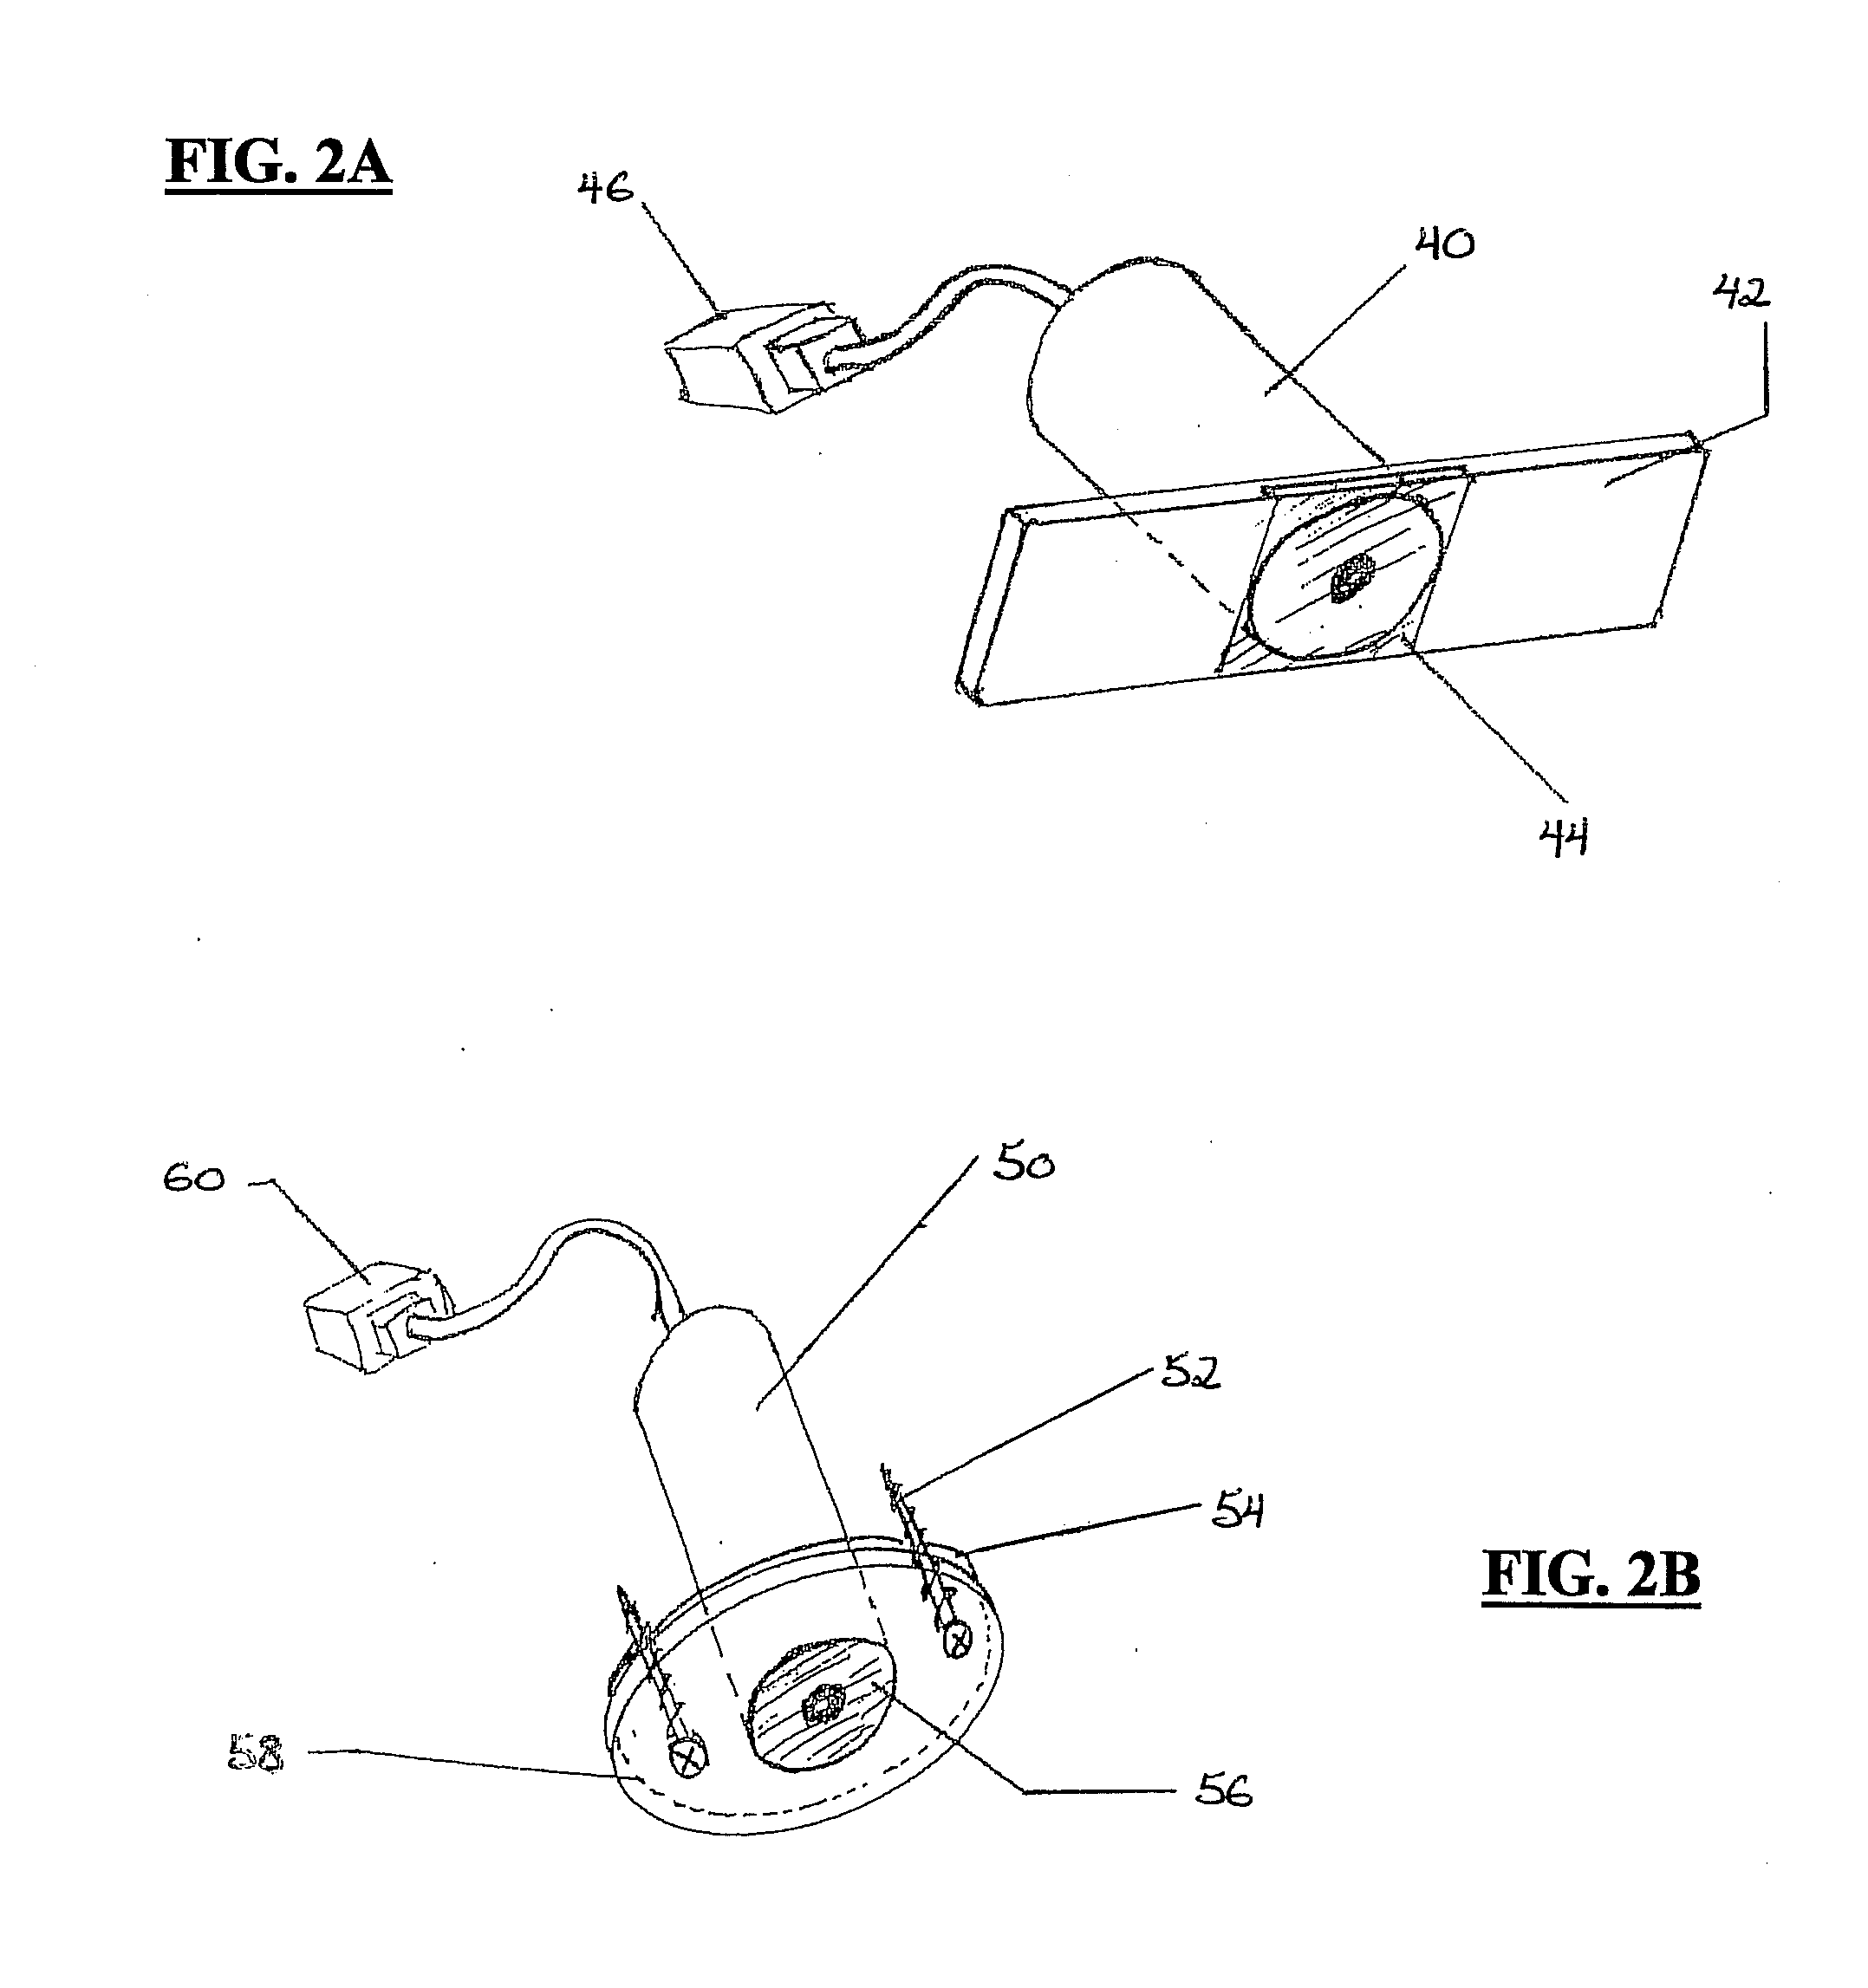 Method and system for laser projection and holographic diffraction grating for a vehicle